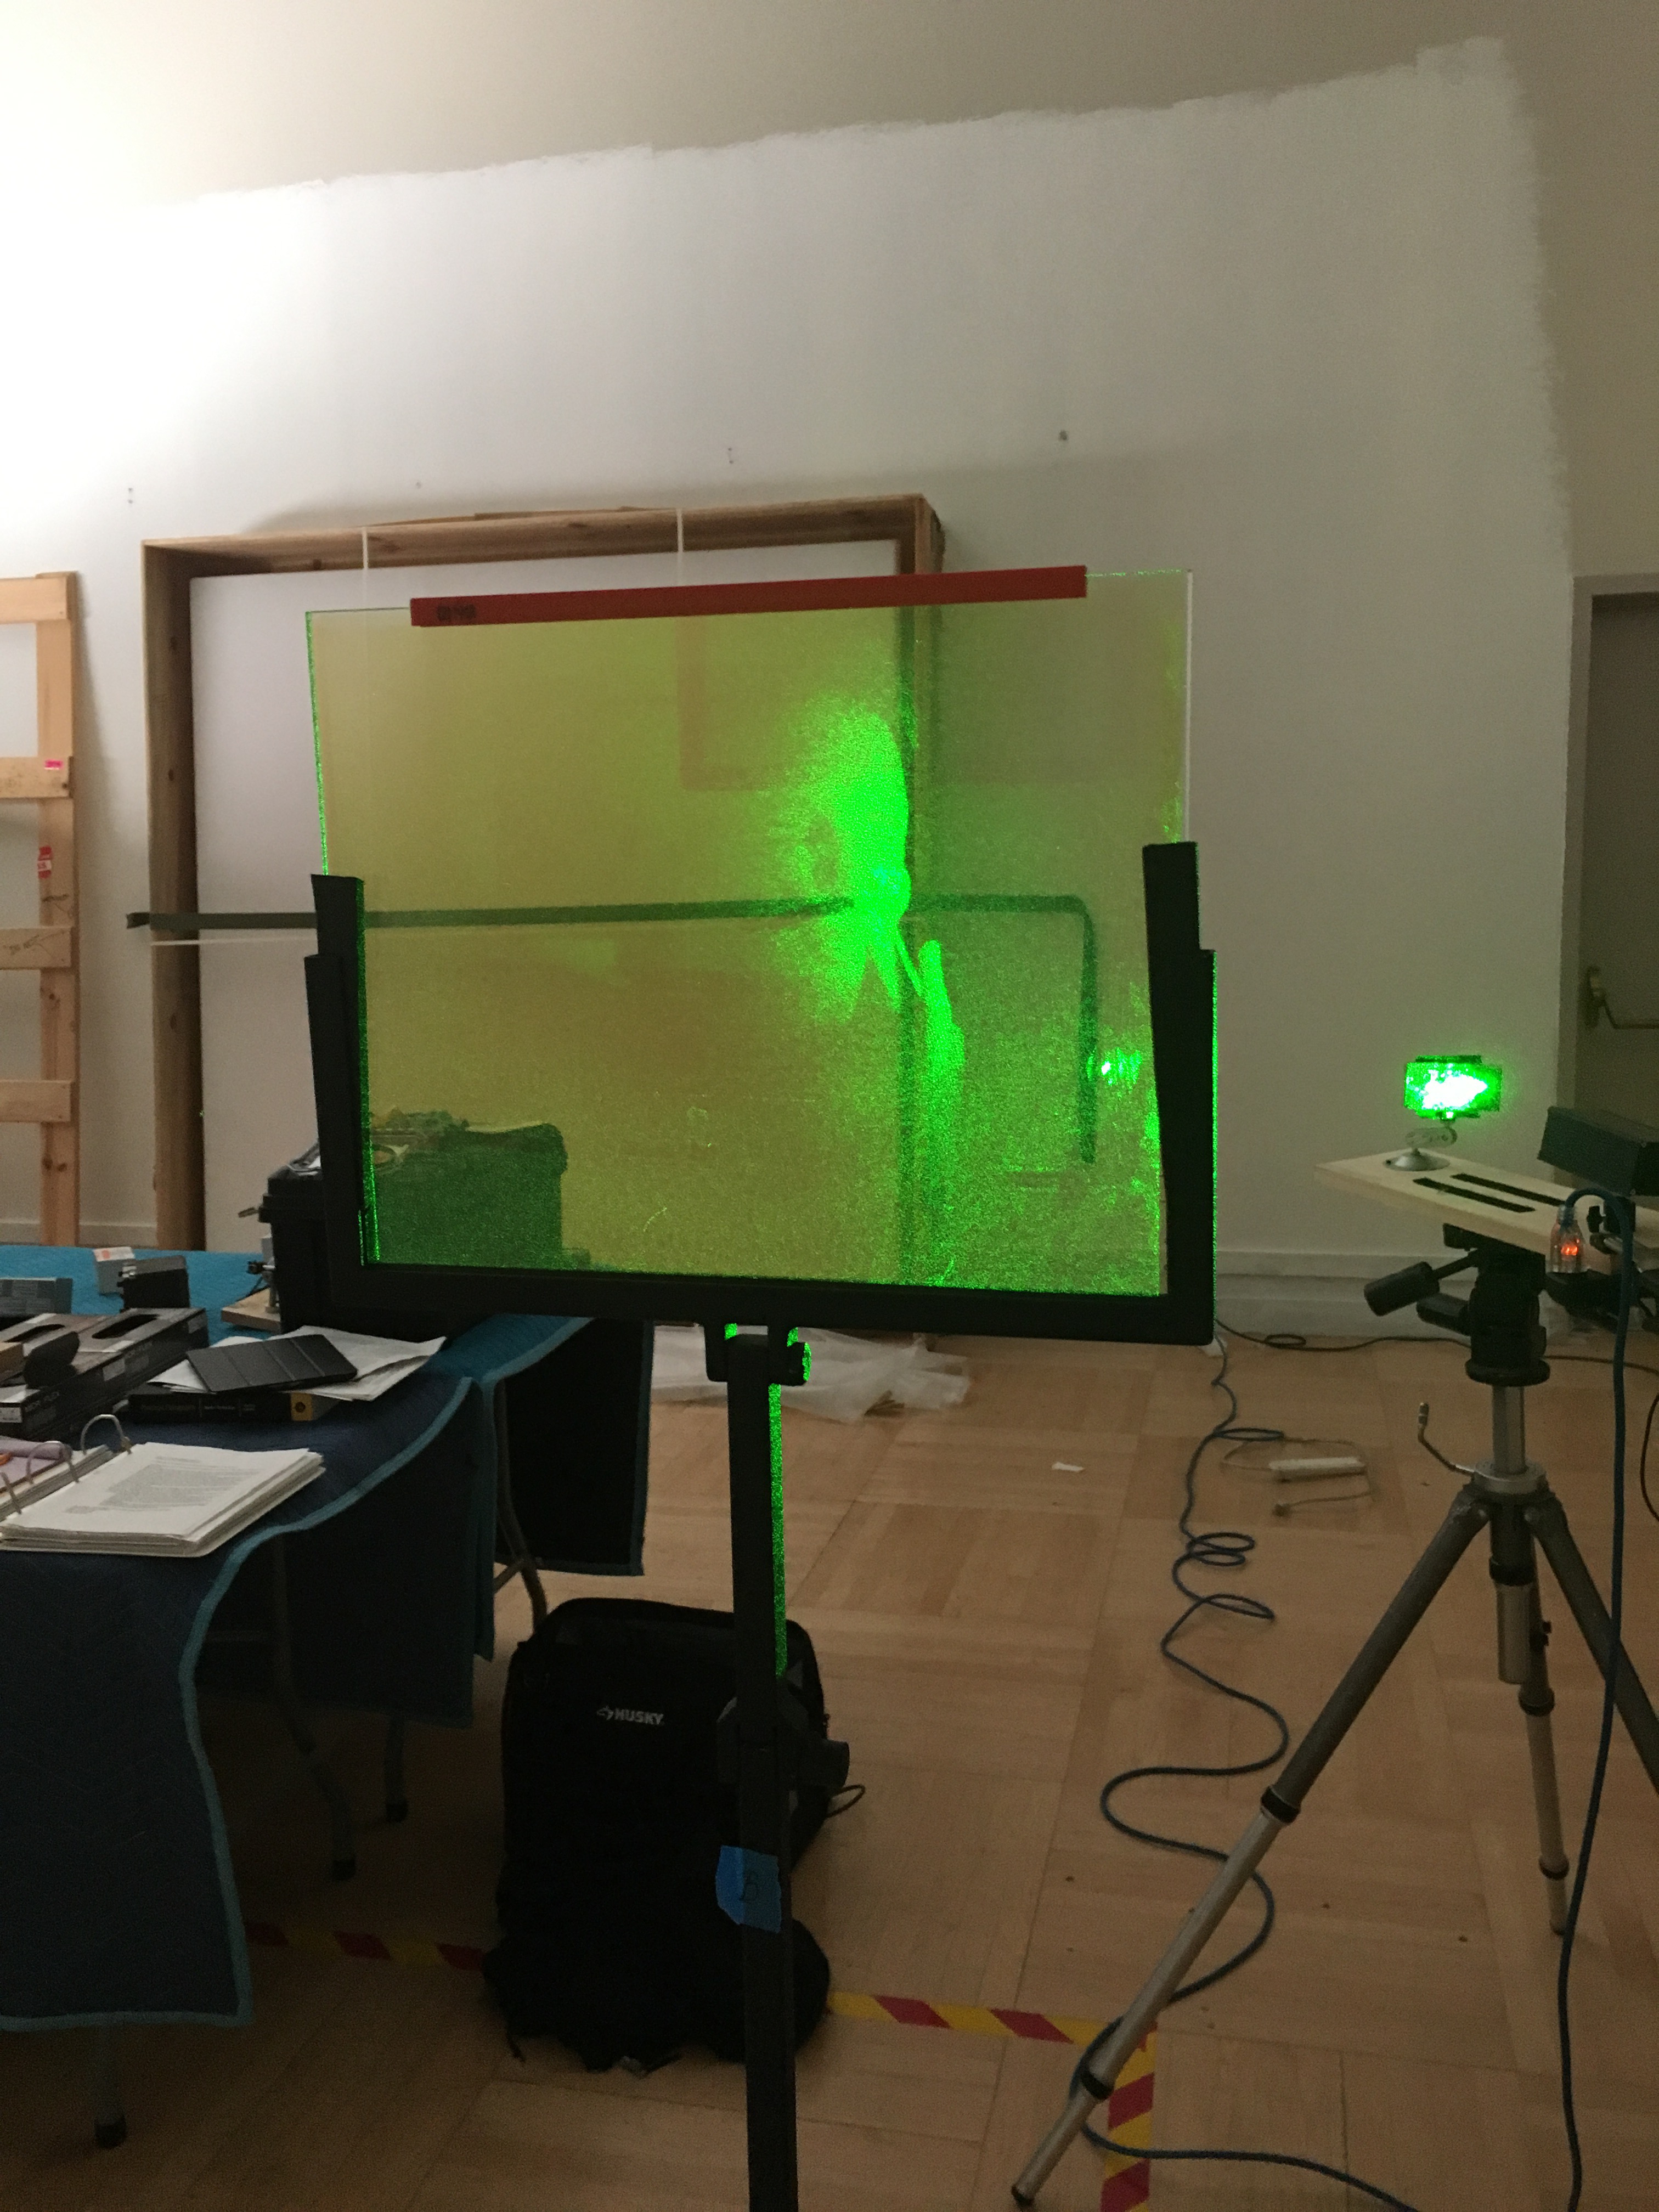 During a test with James Graham, the beam from the diode laser is reflected into a mirror, in order to illuminate the hologram from behind. Photo courtesy of Zoe Blackwell, 2018